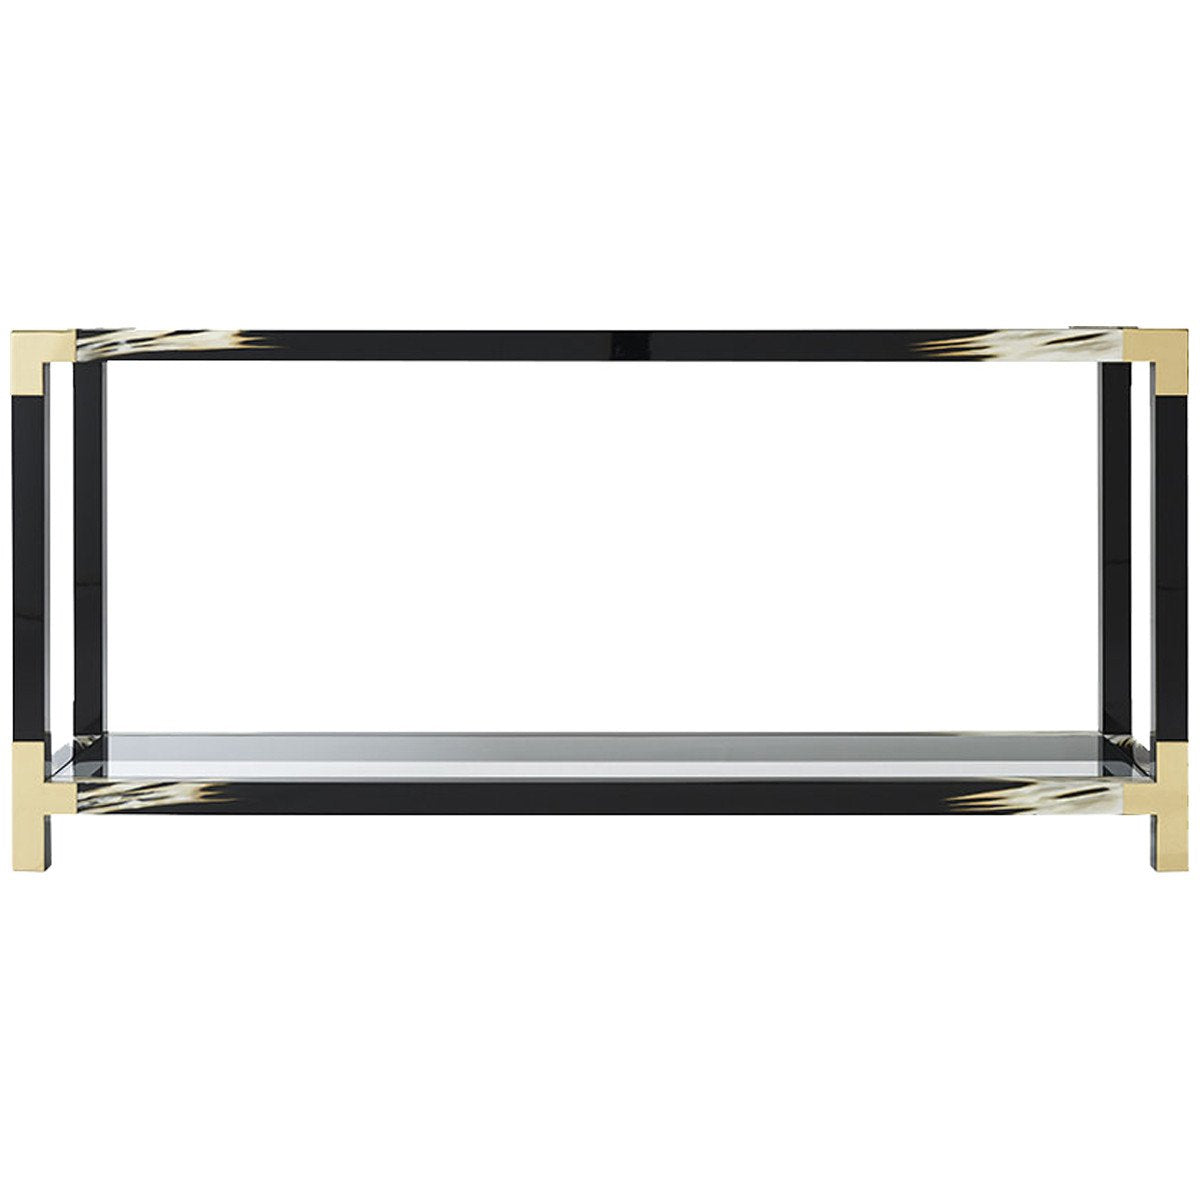 Theodore Alexander Cutting Edge Console Table